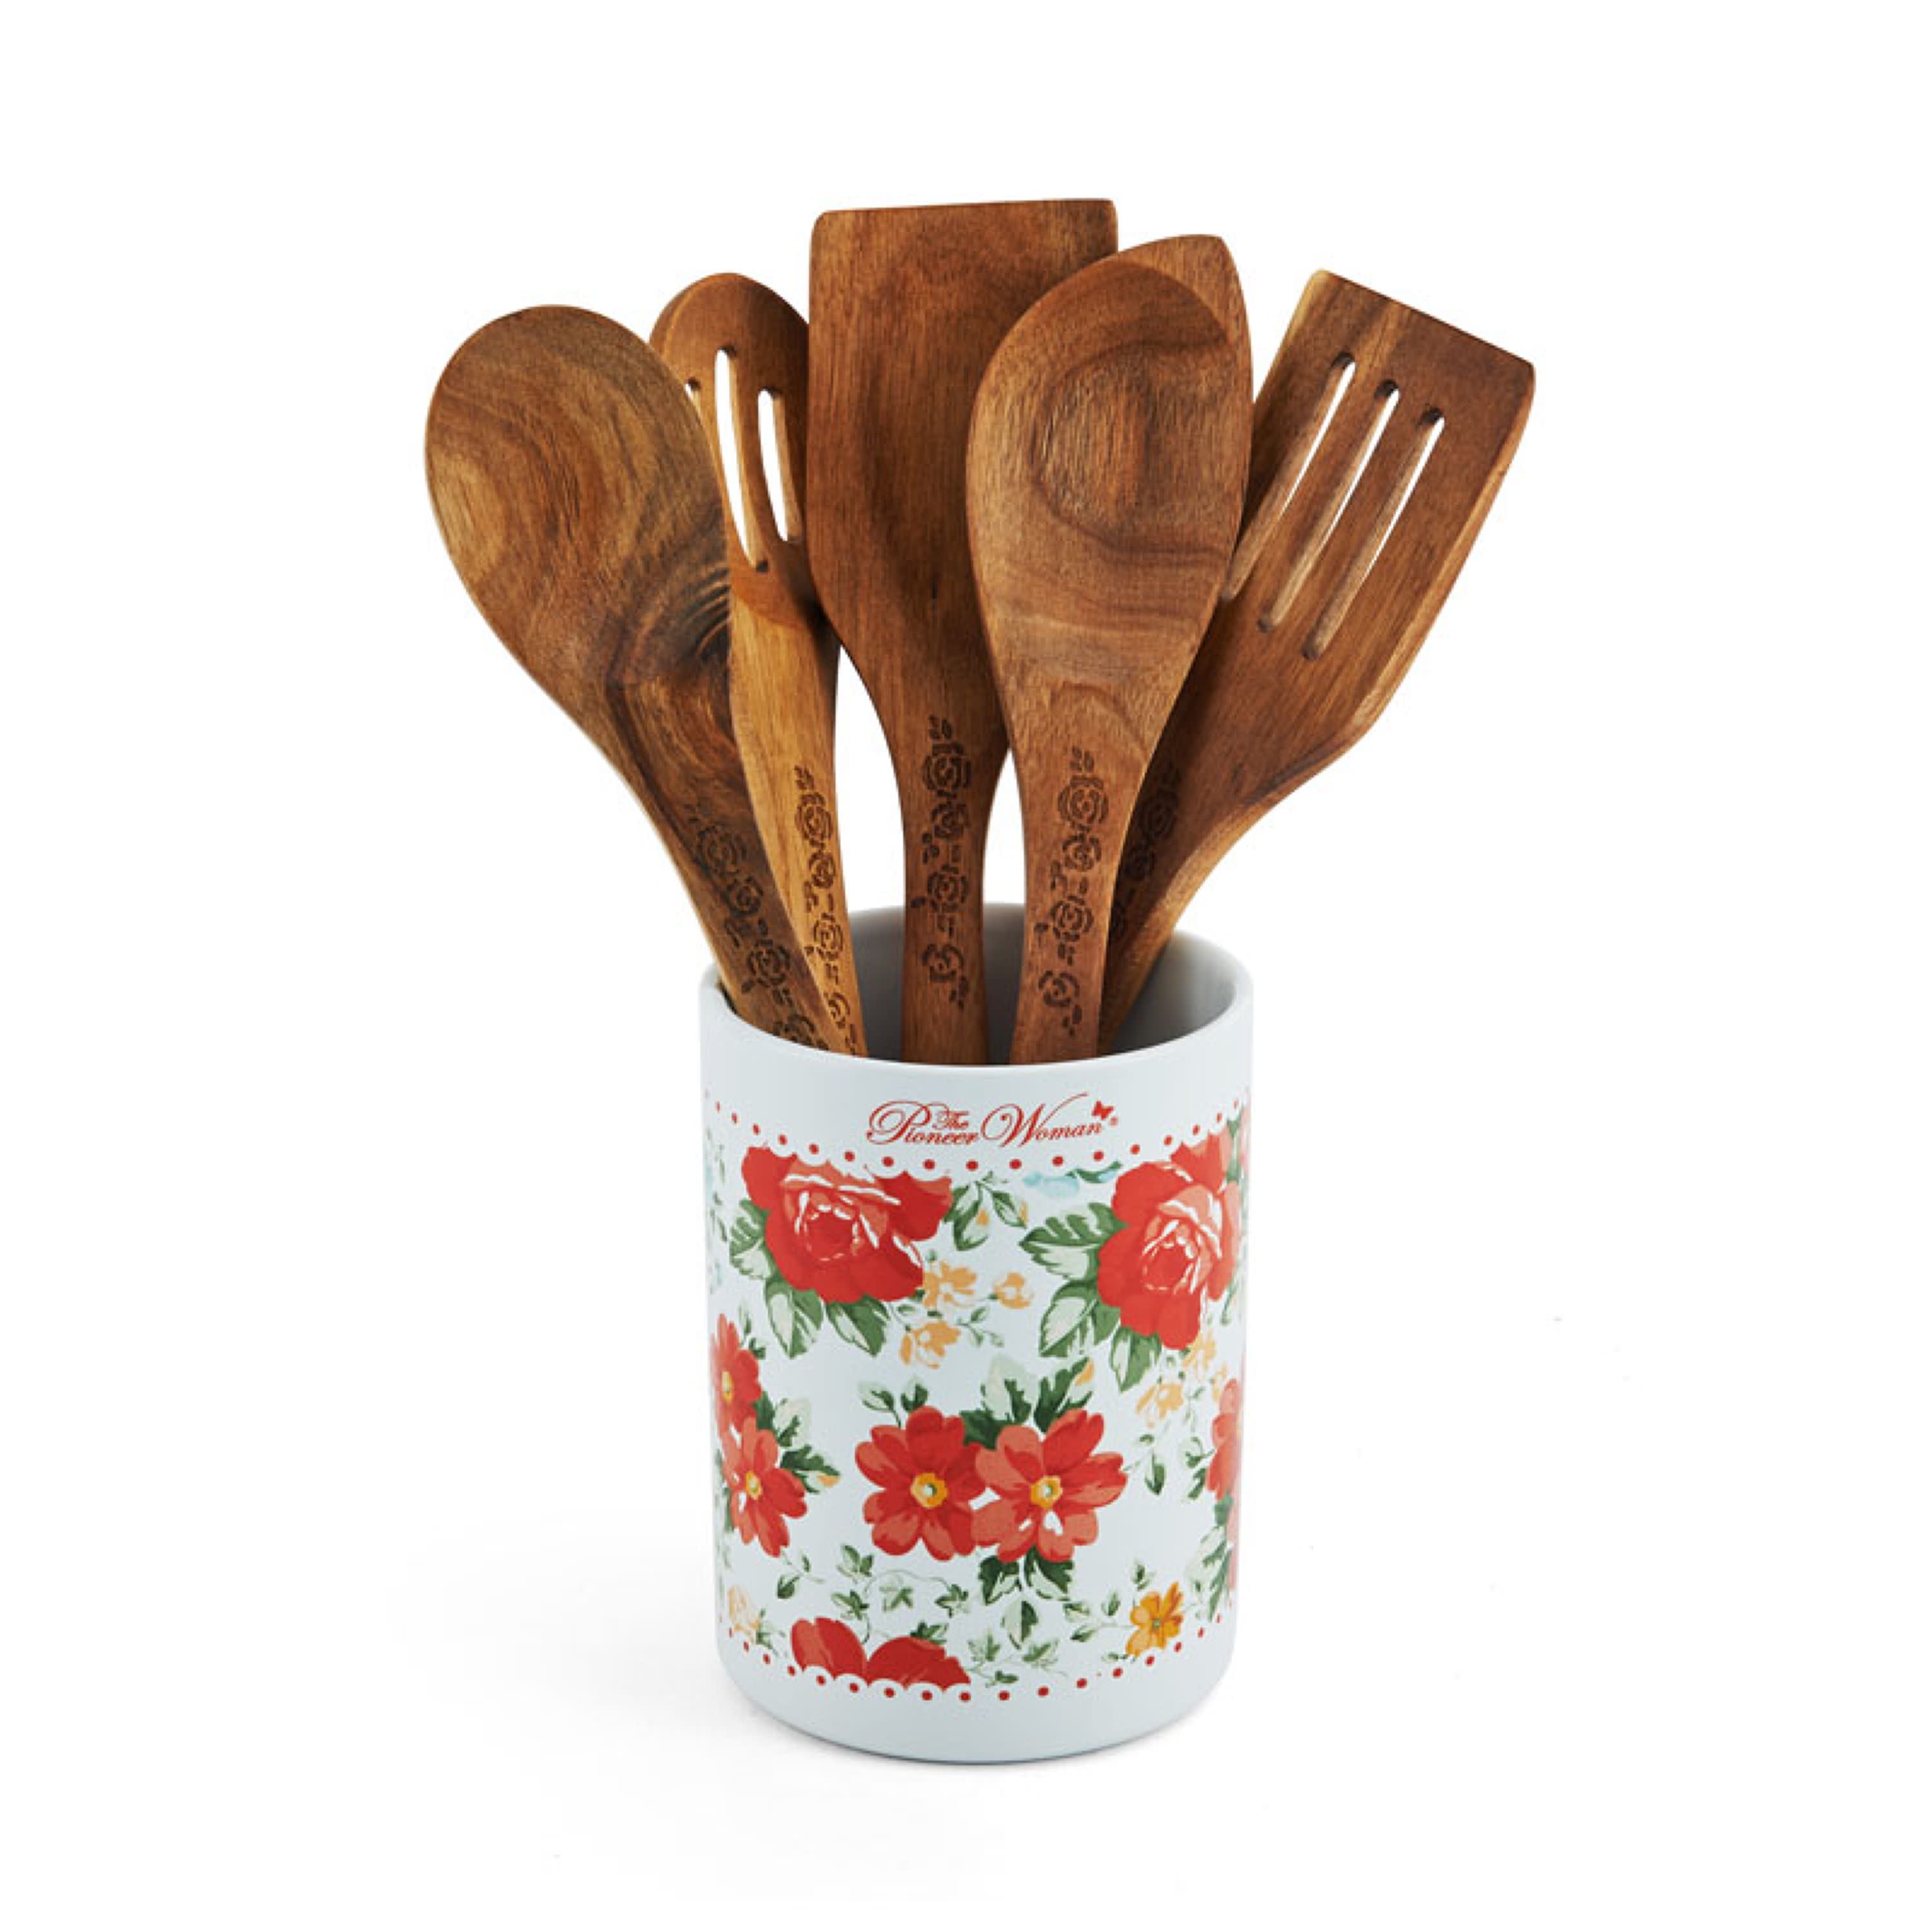 Details about   The Pioneer Woman 6-Piece Crock And Wooden Tool Set In Vintage Floral 